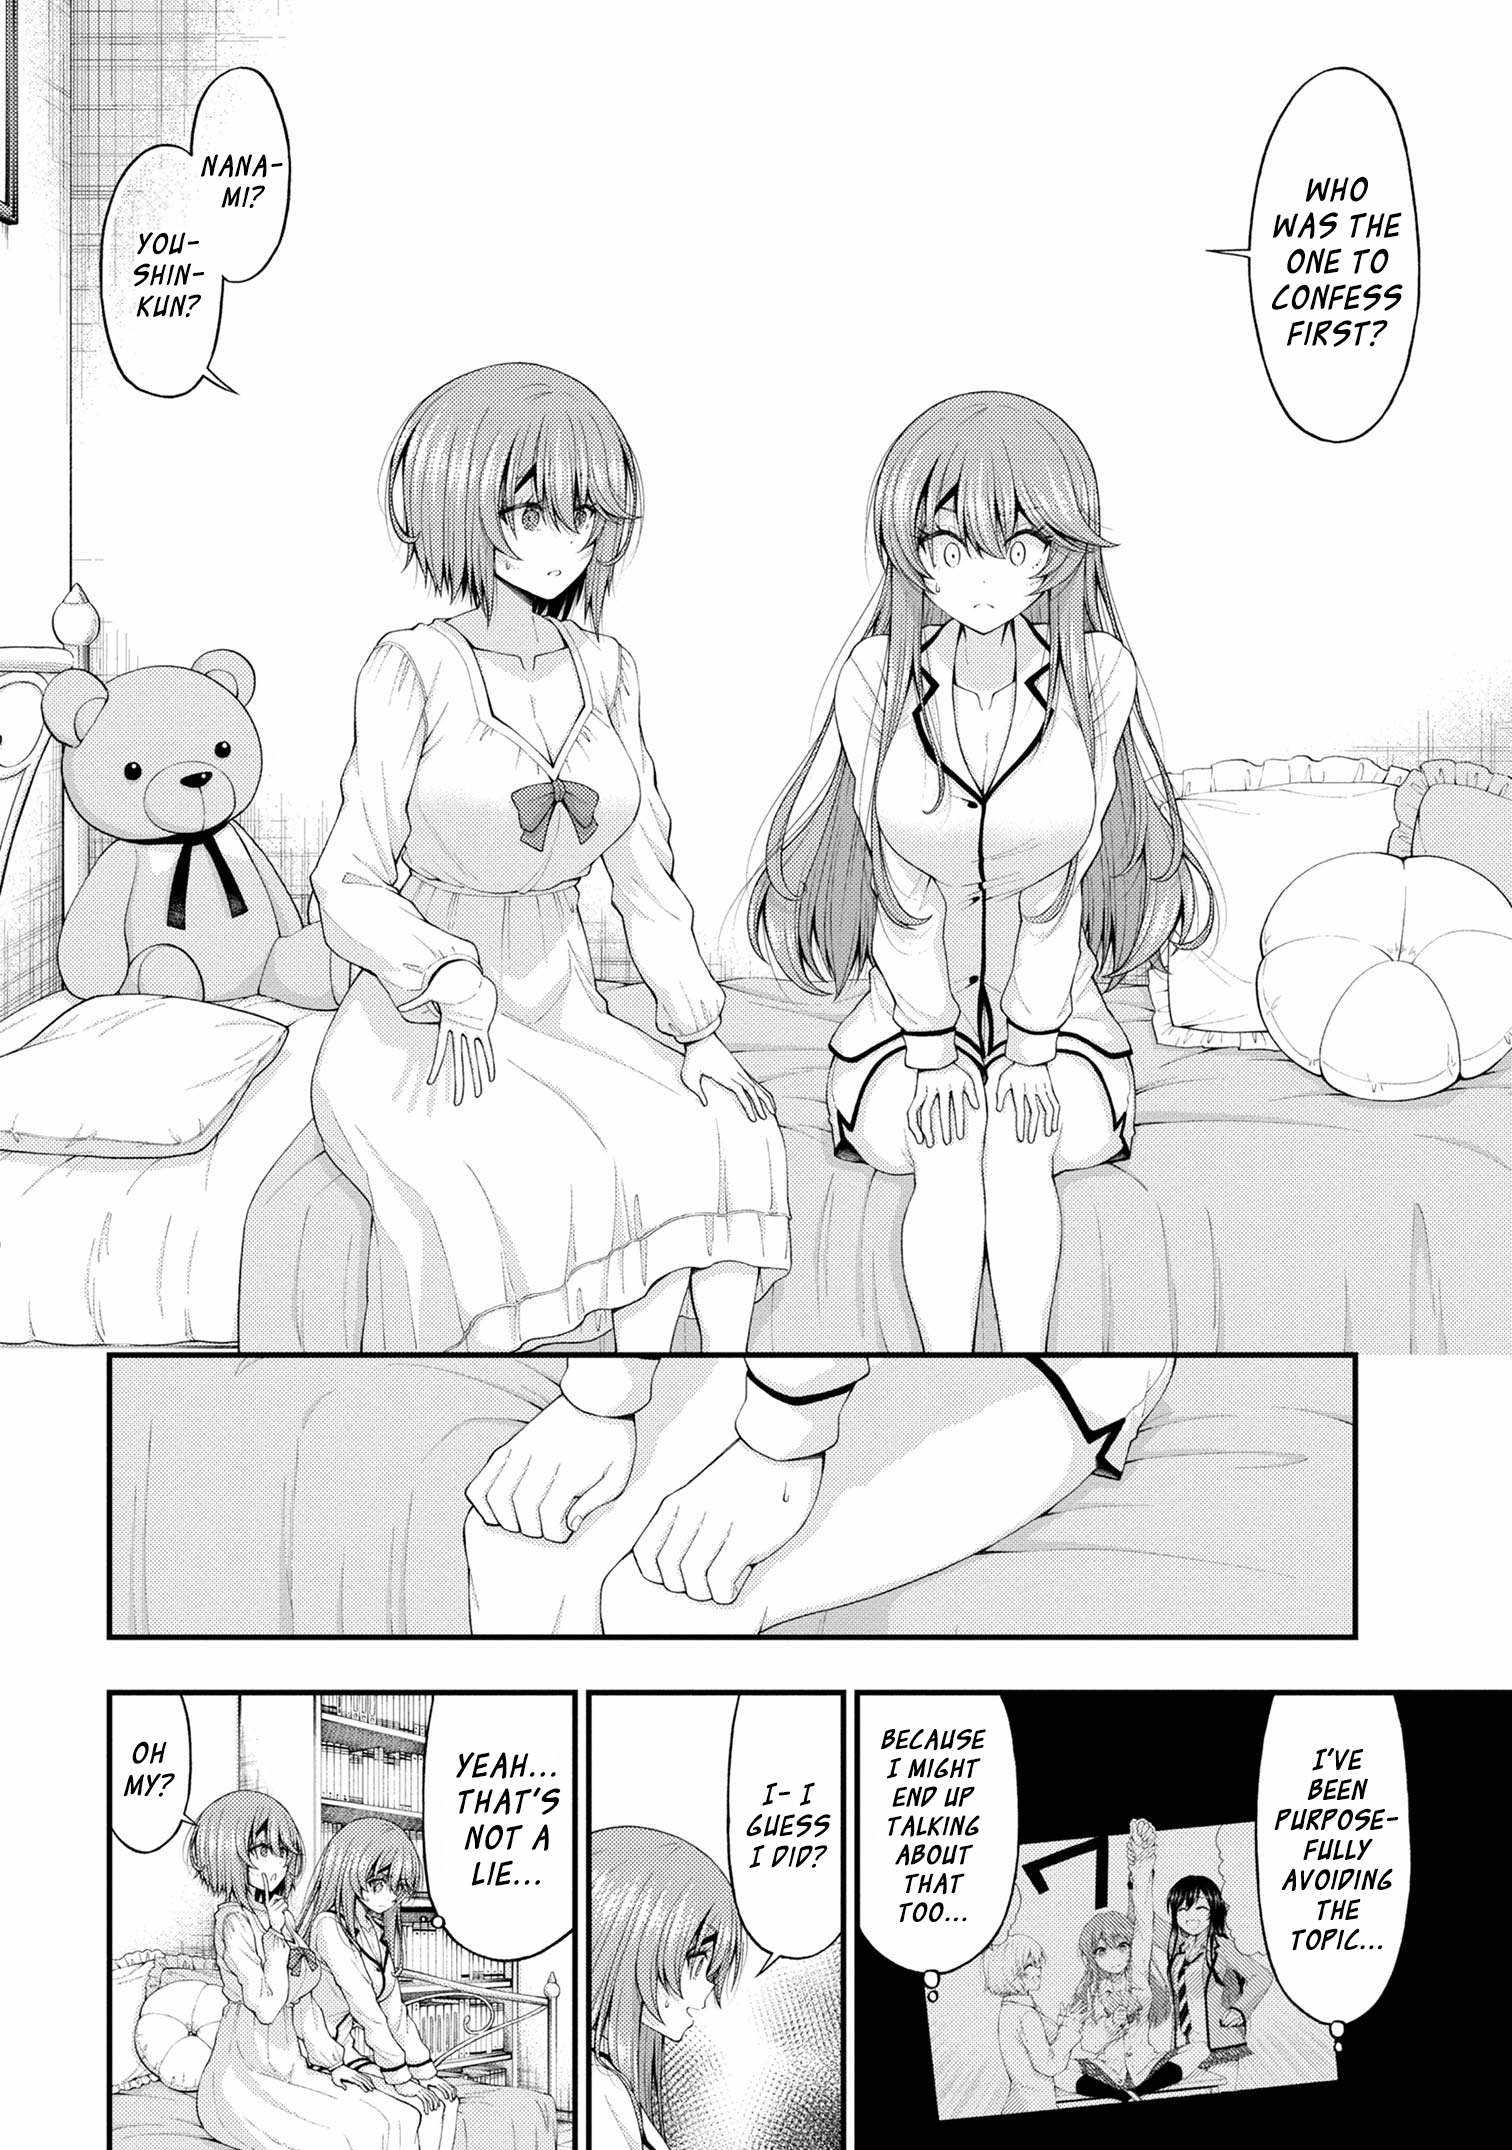 The Gal Who Was Meant to Confess to Me as a Game Punishment Has Apparently Fallen in Love with Me Chapter 12-5-eng-li - Page 13